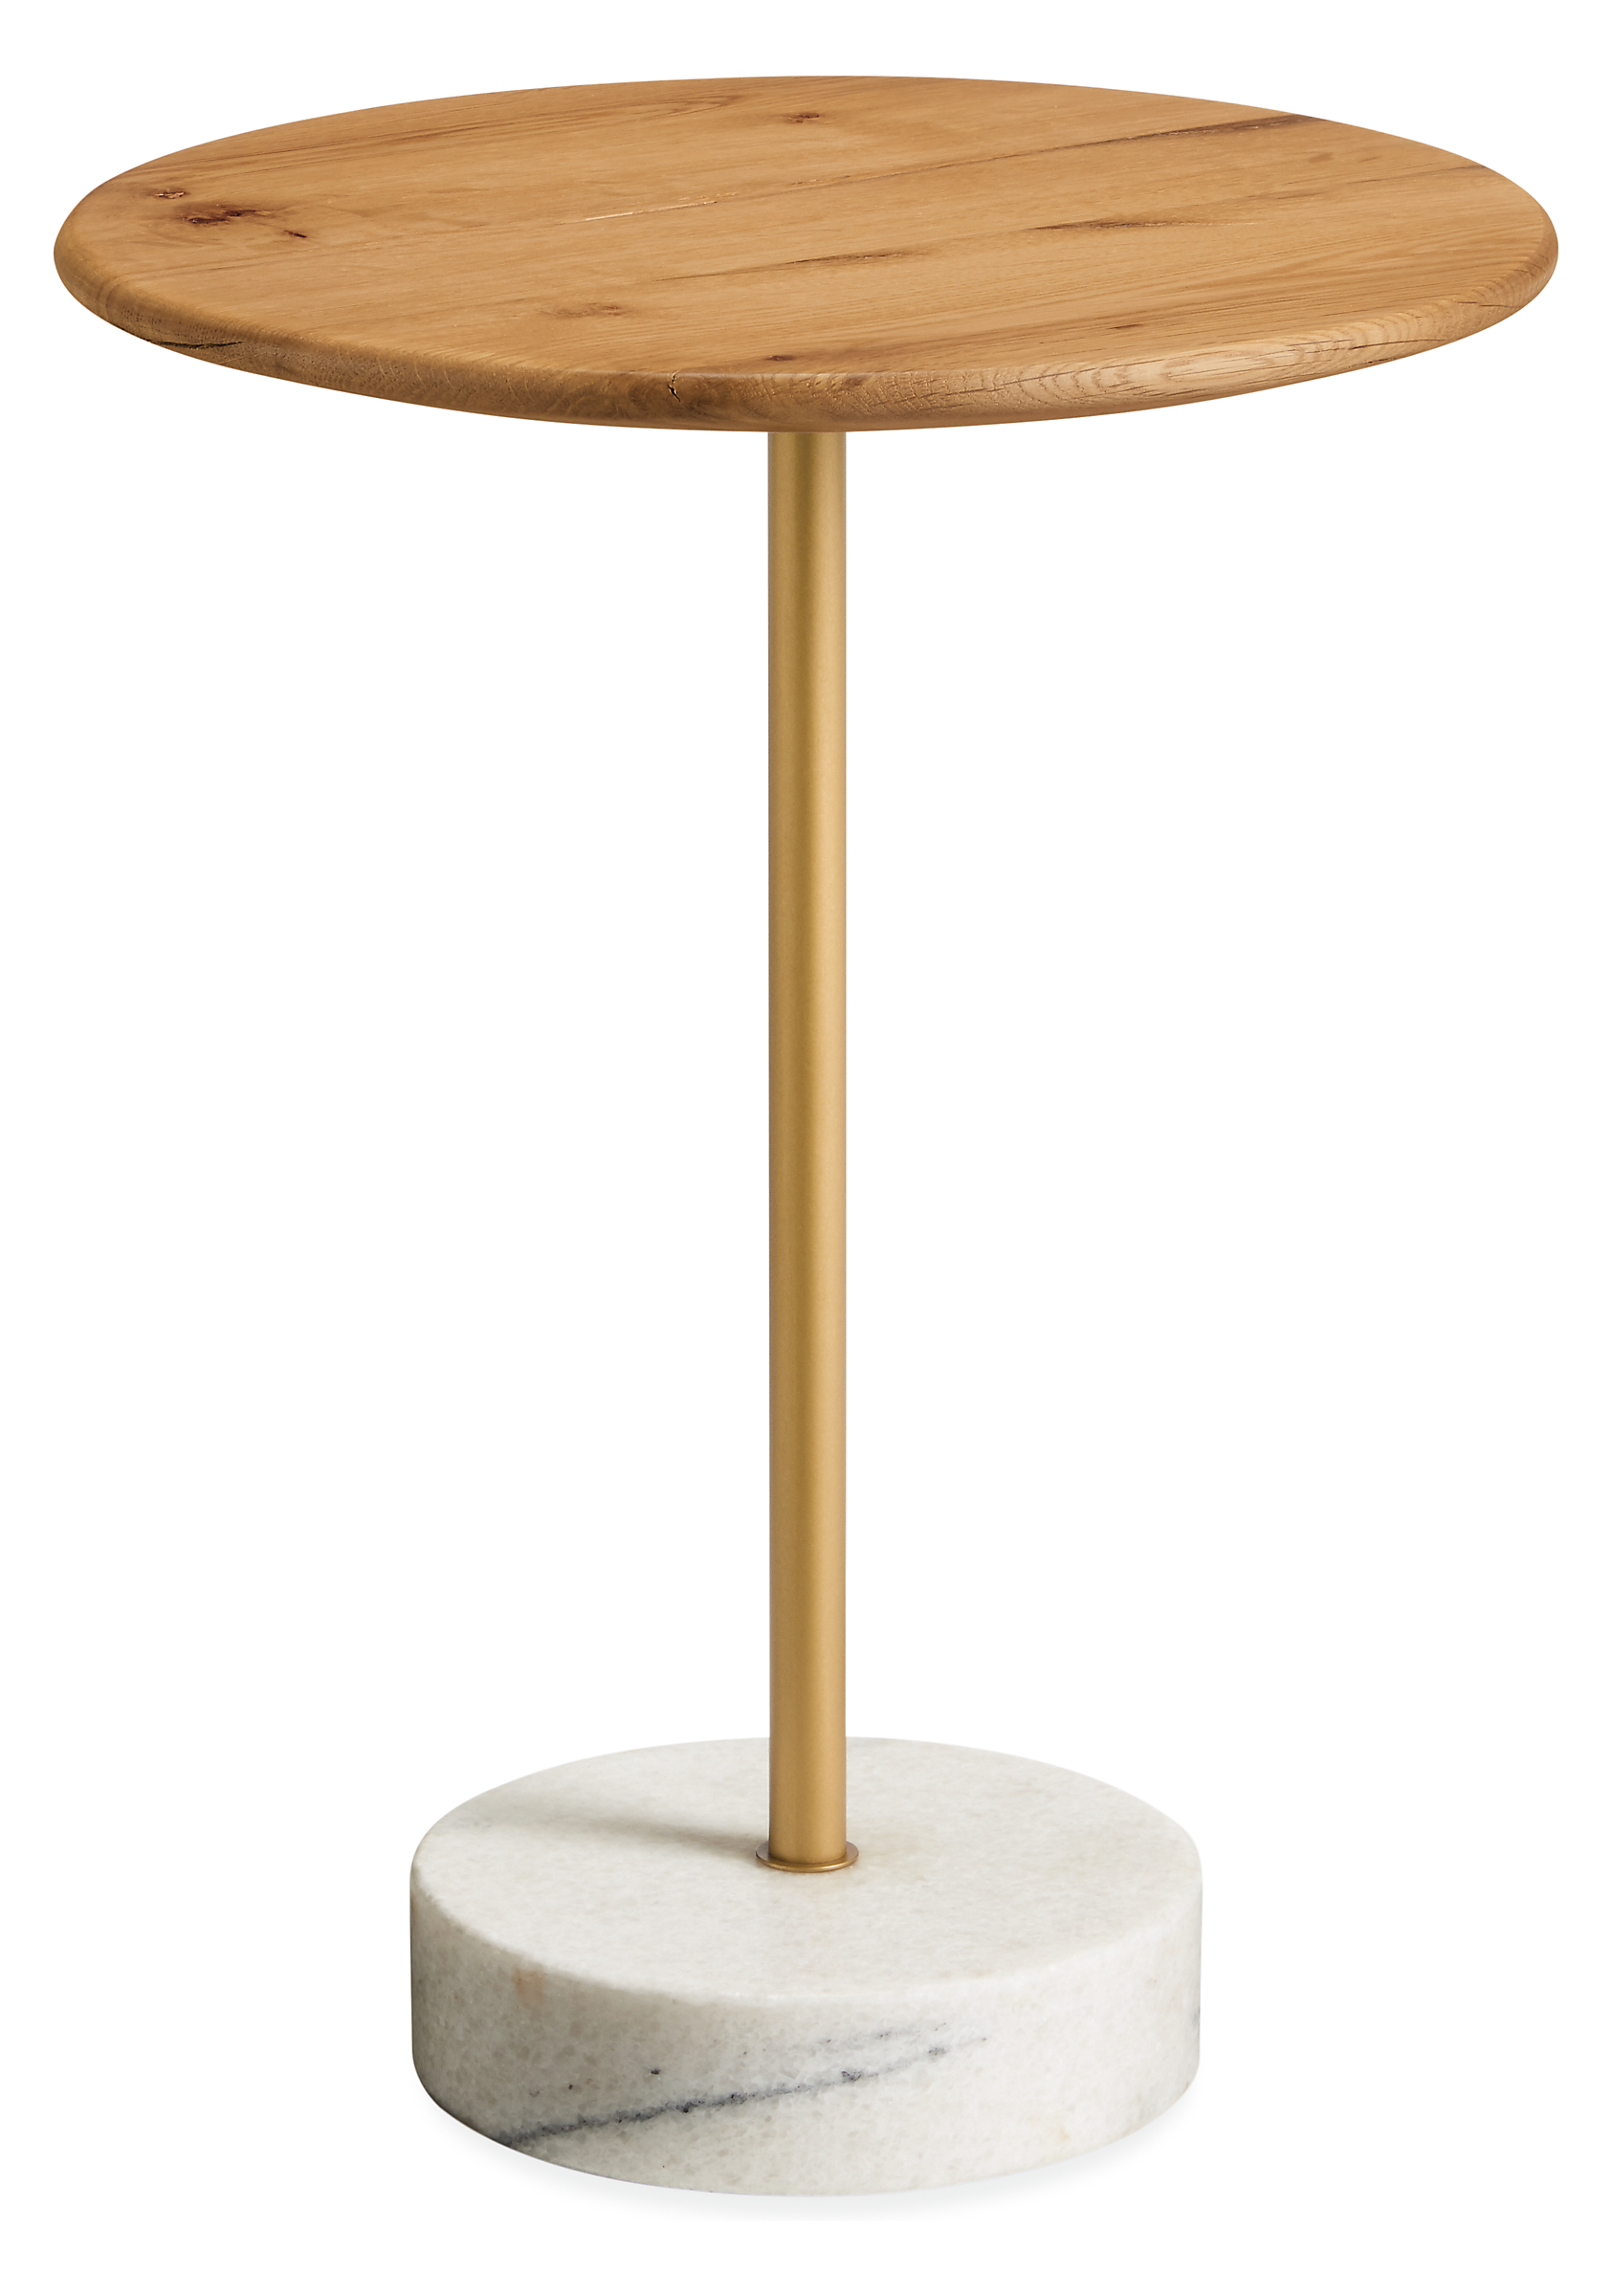 Arlington 14 diam 18h End Table in Brushed Gold with Reclaimed White Oak